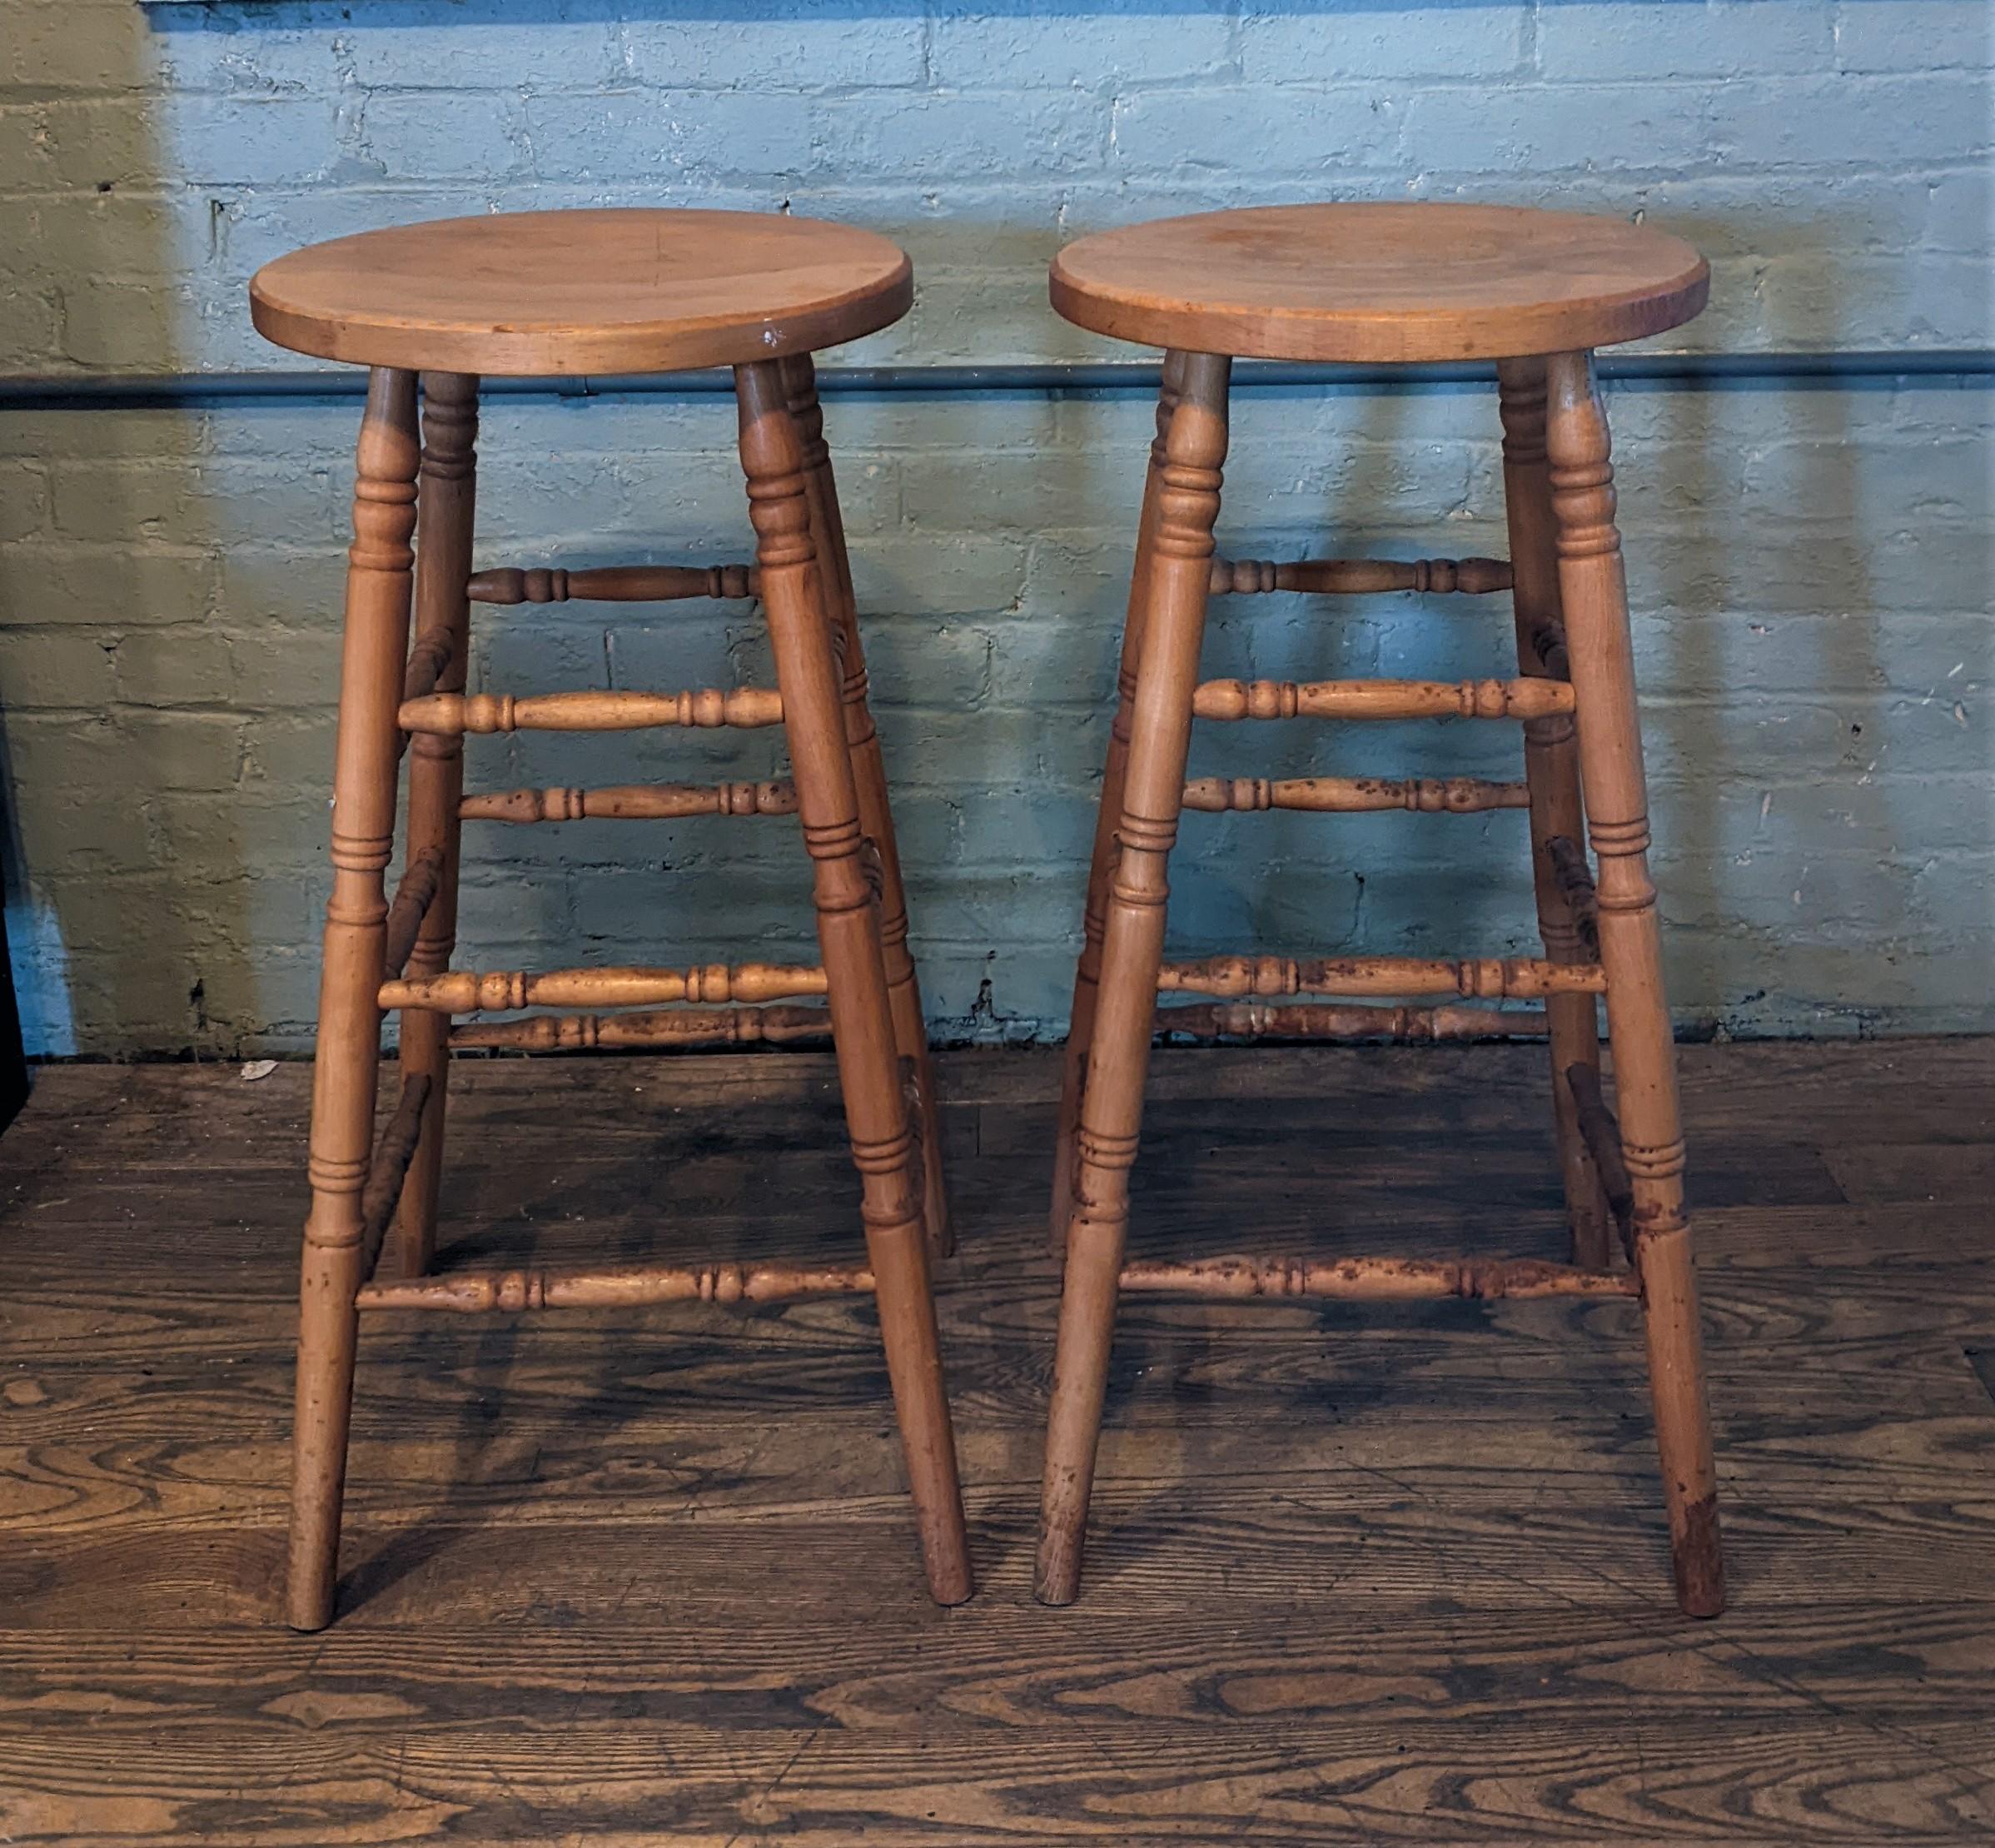 Pair of Vintage bar stools

Overall Dimensions: 15 1/4